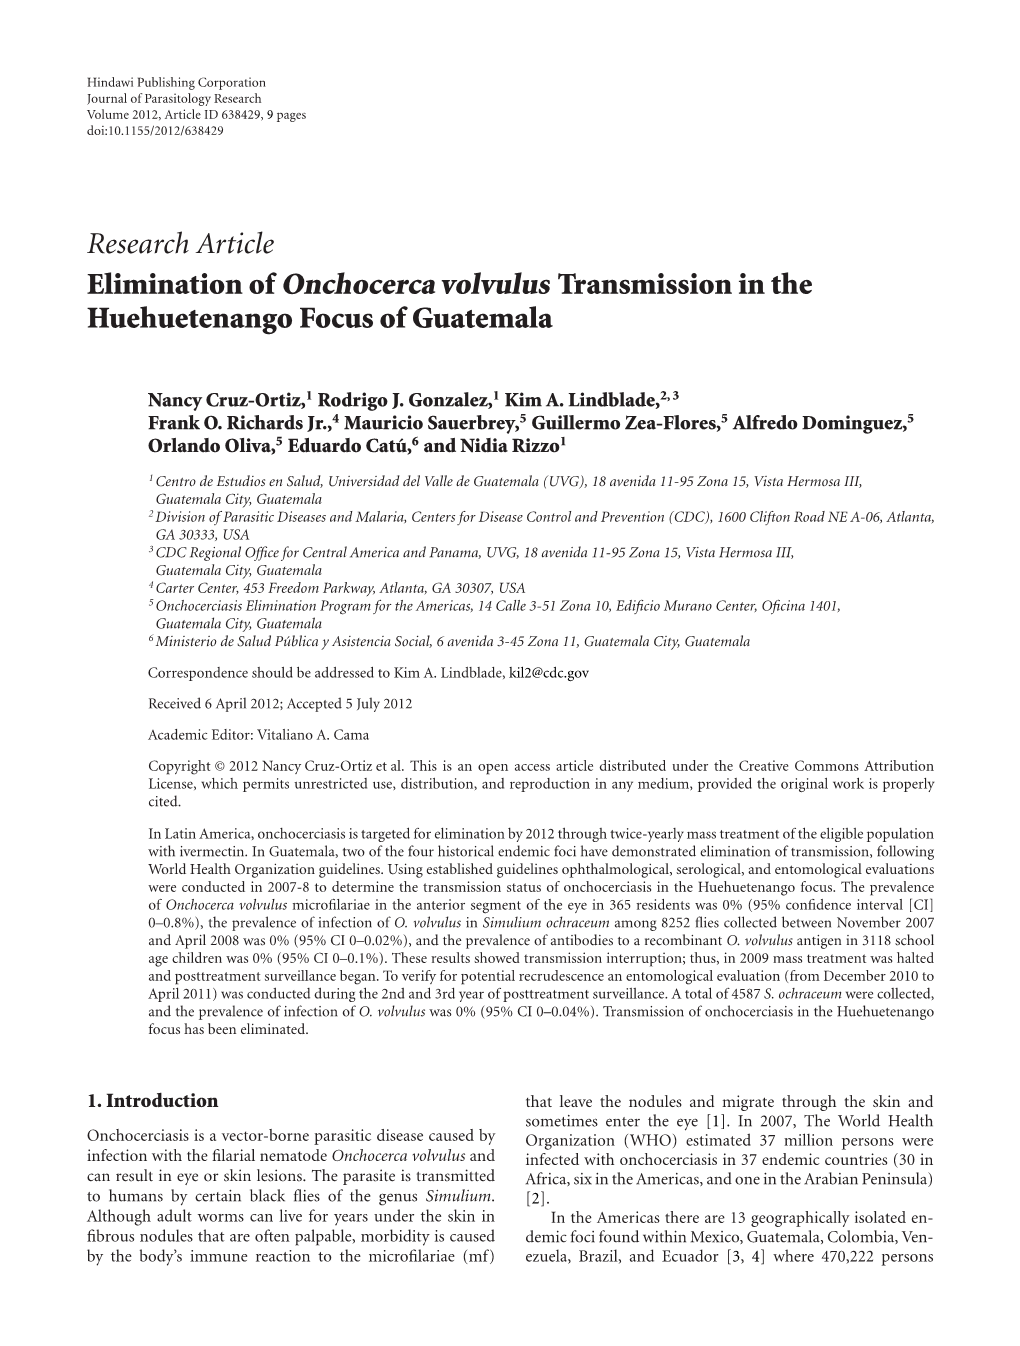 Research Article Elimination of Onchocerca Volvulus Transmission in the Huehuetenango Focus of Guatemala